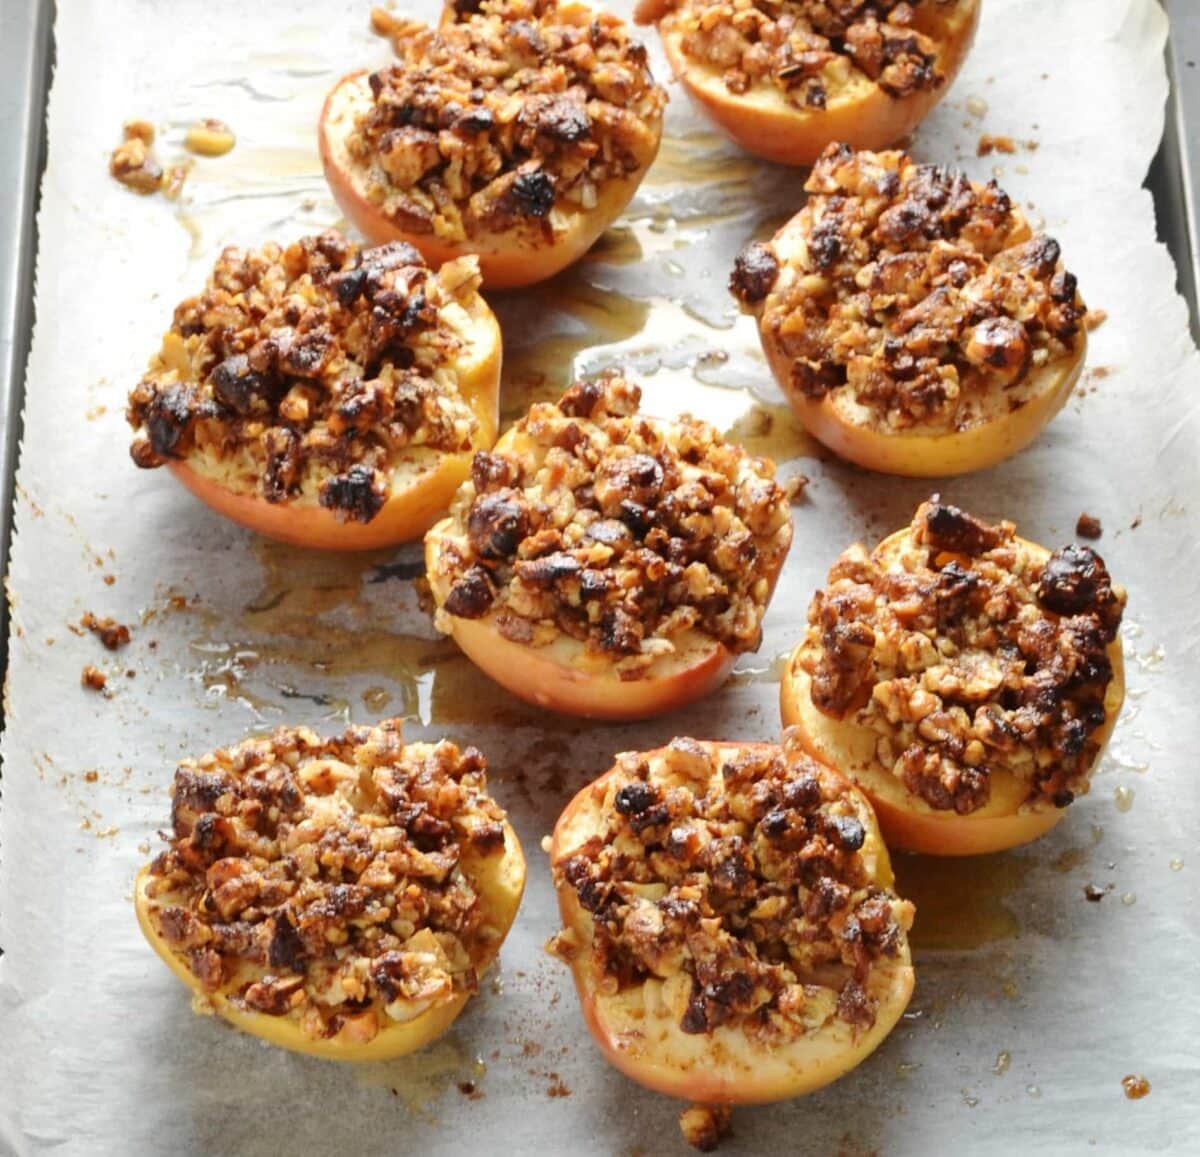 Apple halves with pecans pieces on top of baking paper.